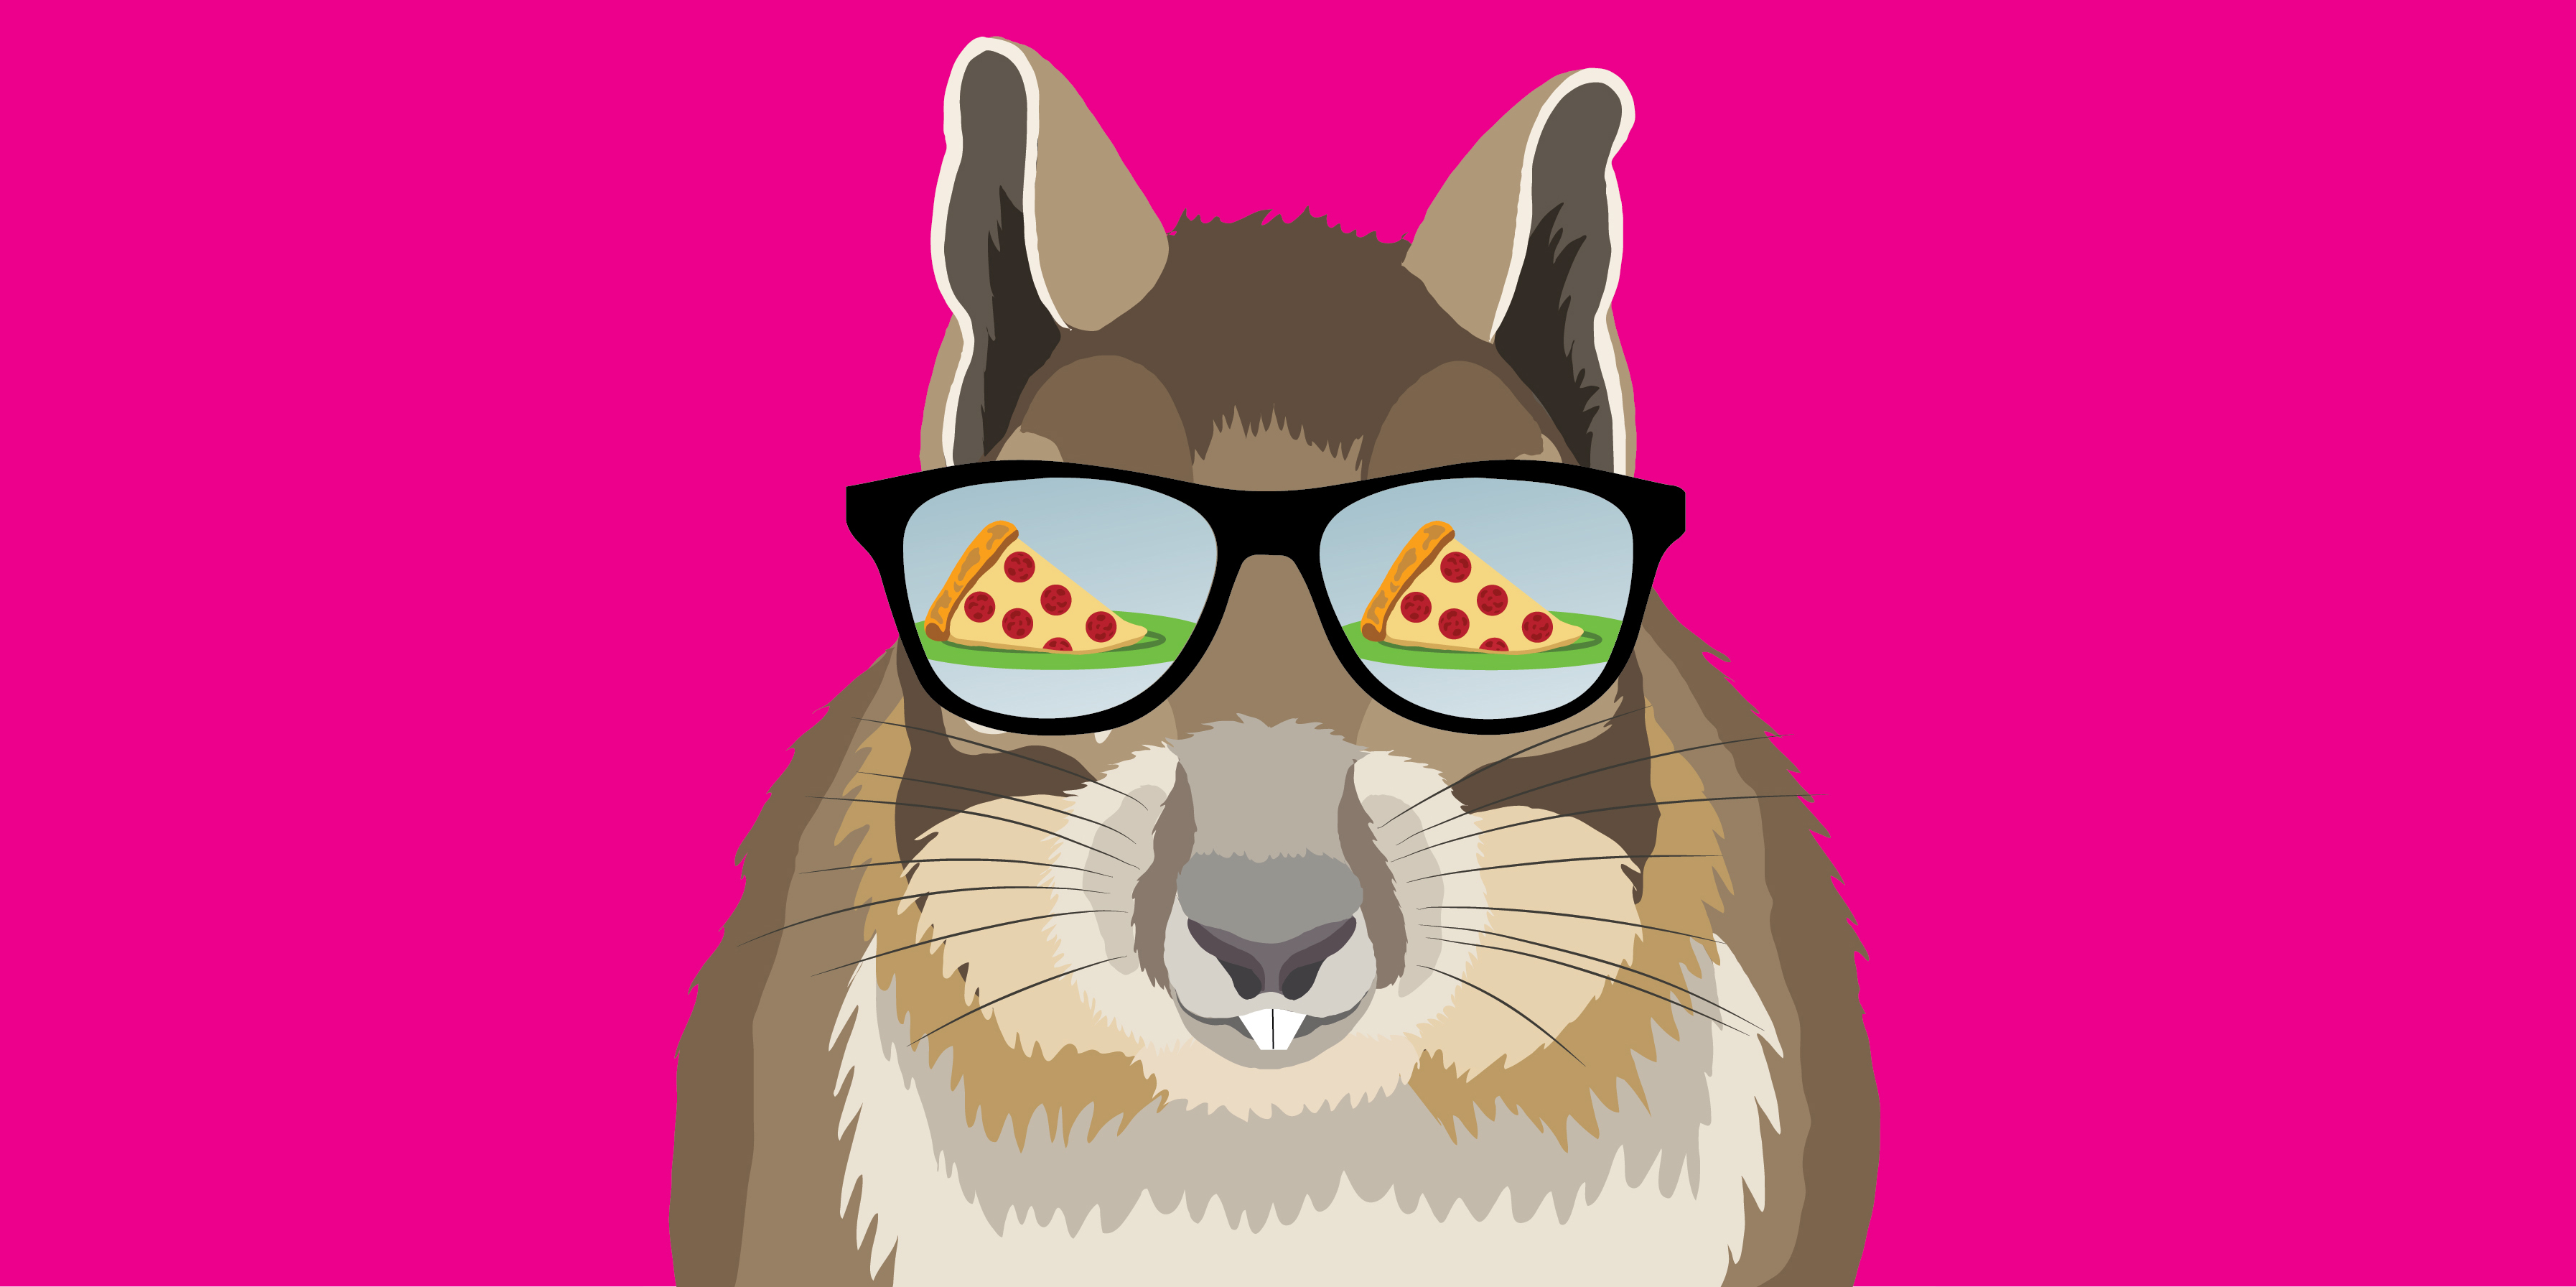 Drawing of a ground squirrel wearing sunglasses on a pink background. A slice of pizza is in the reflection of the sunglasses.